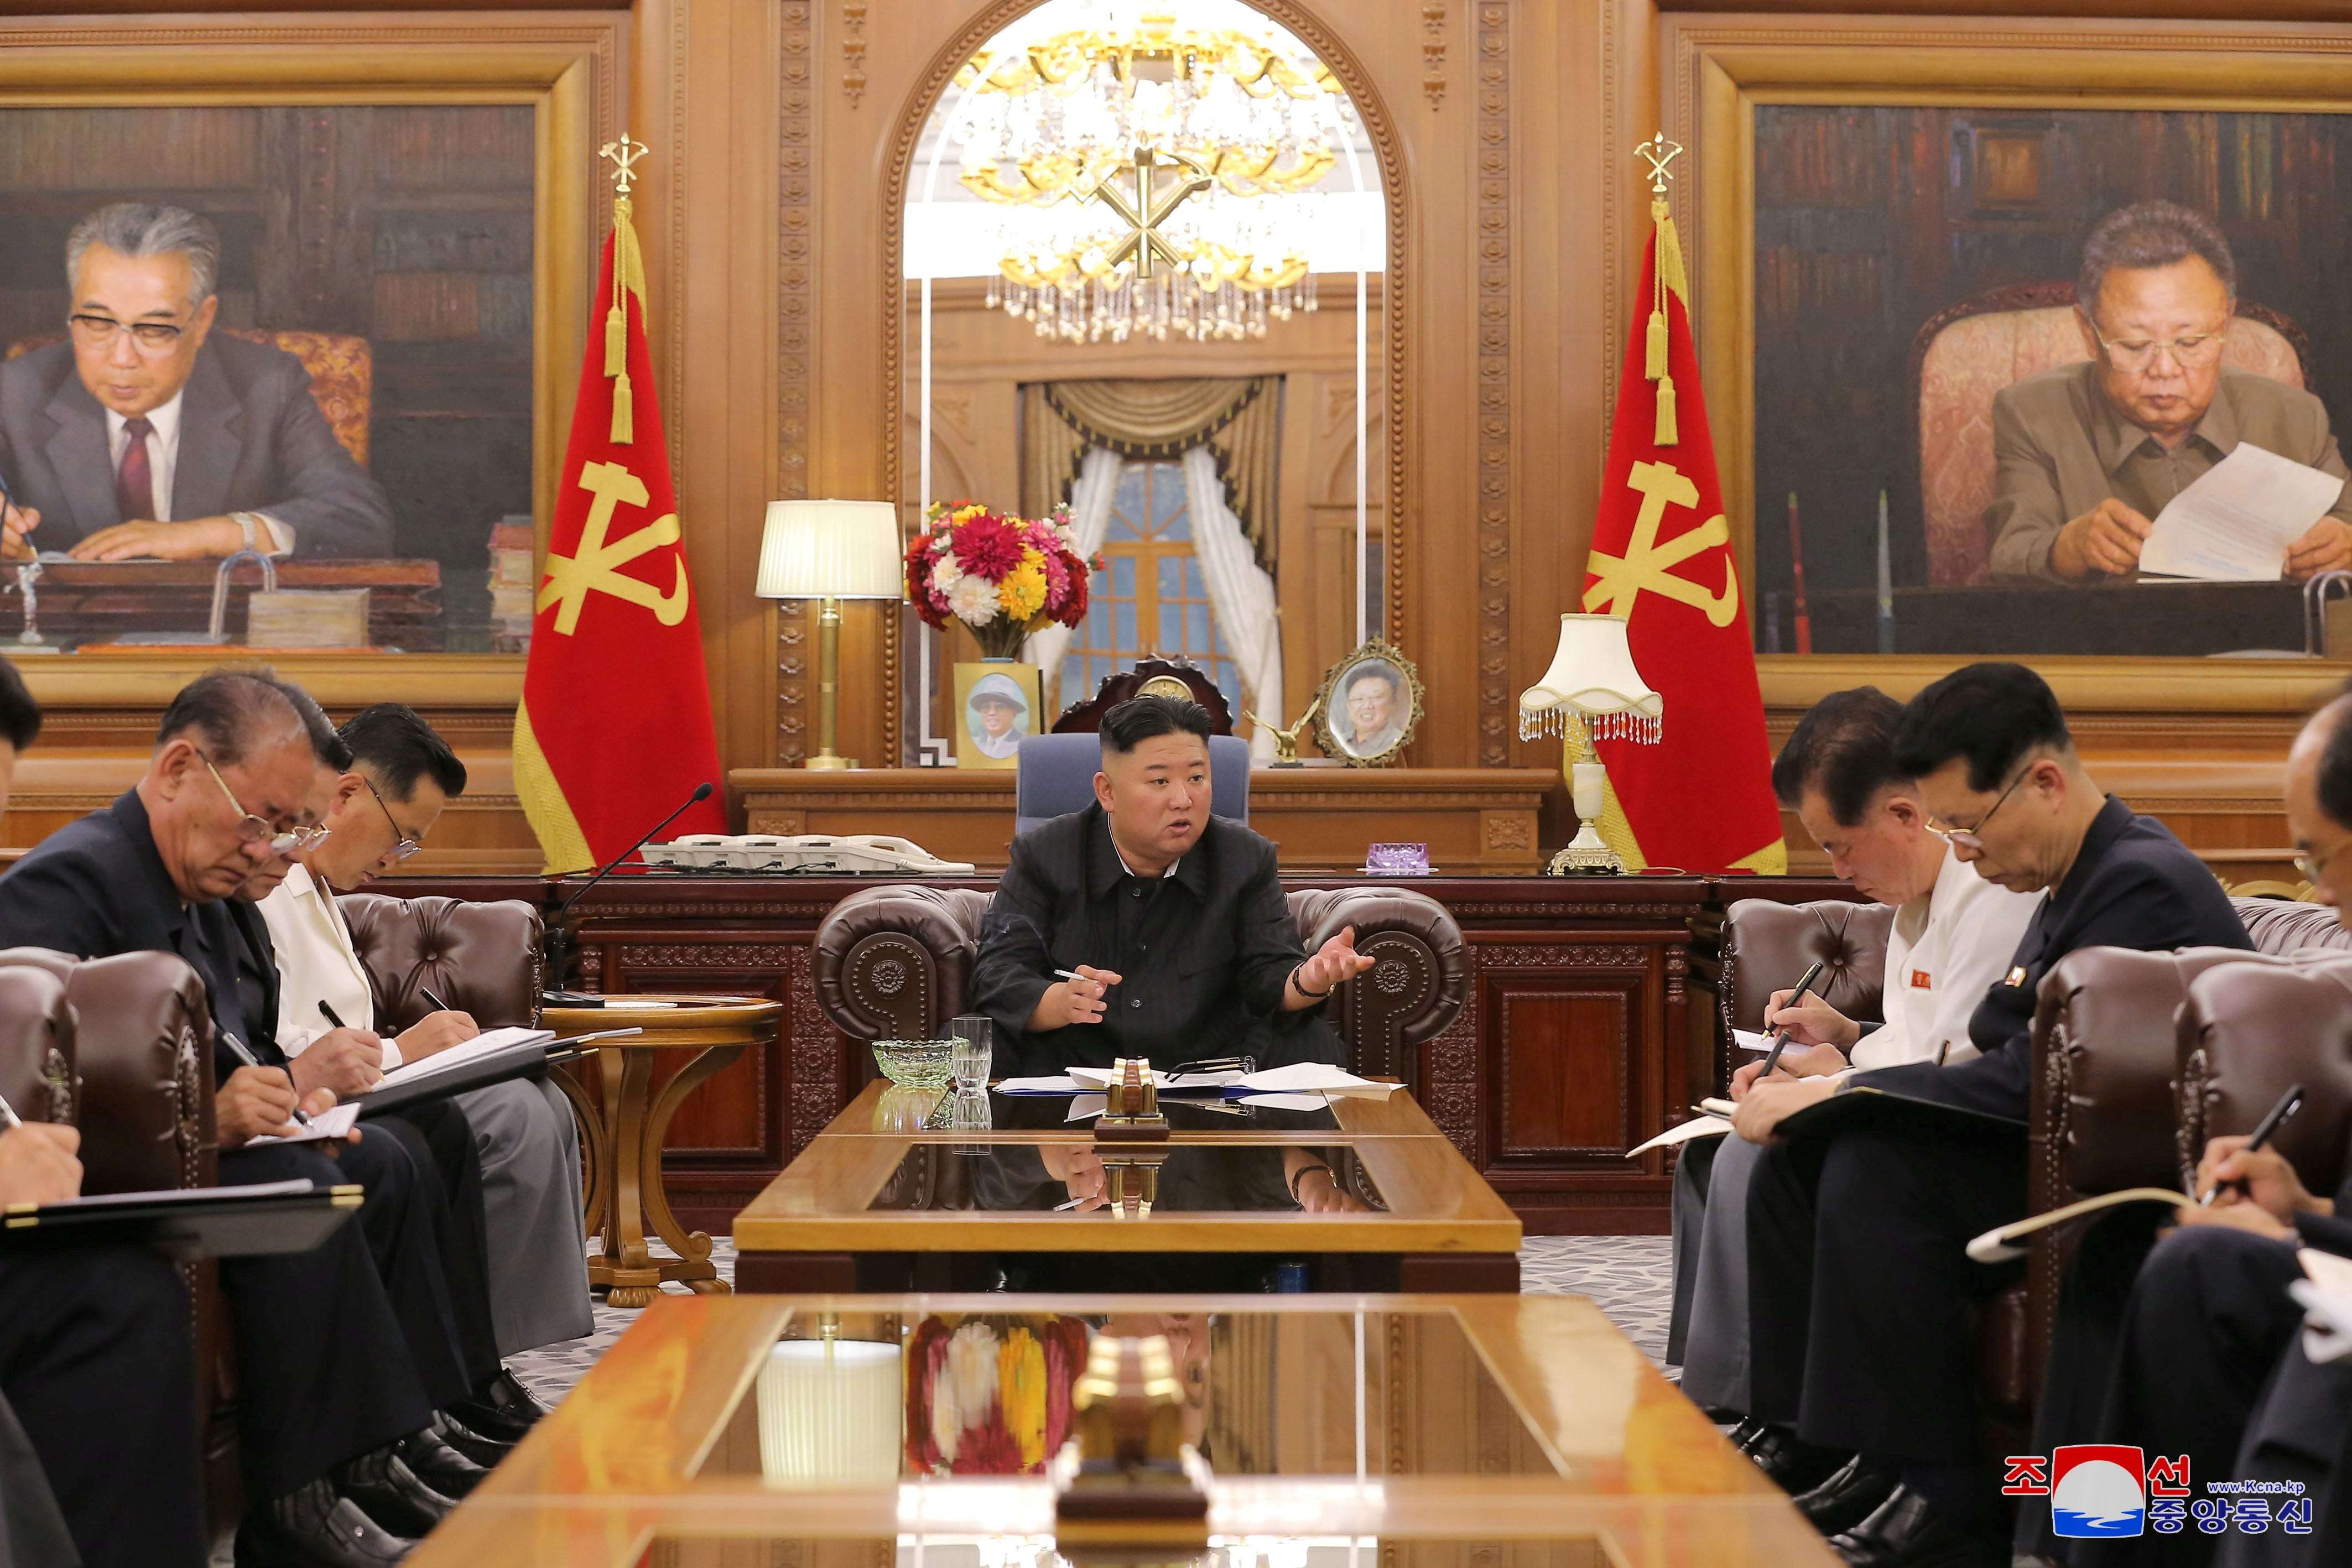 Kim Jong Un warns that North Korea is running out of food as reports say a bunch of bananas now costs $45